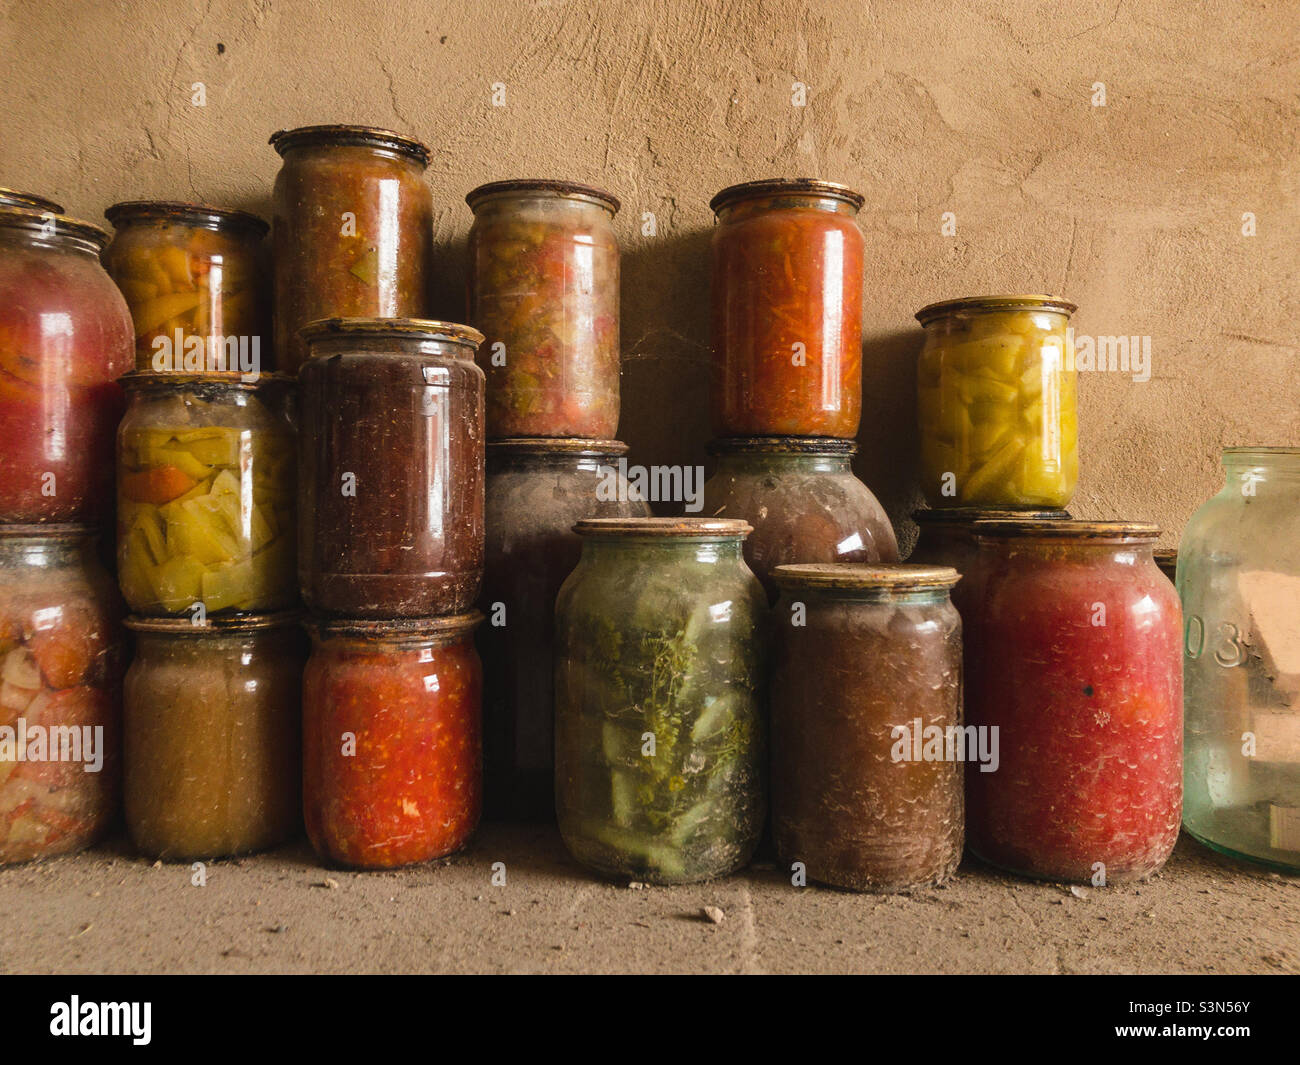 Canned vegetables, fruits and salads in glass jars under an iron lid stand on a dusty floor in a cellar in a garage. Stock Photo